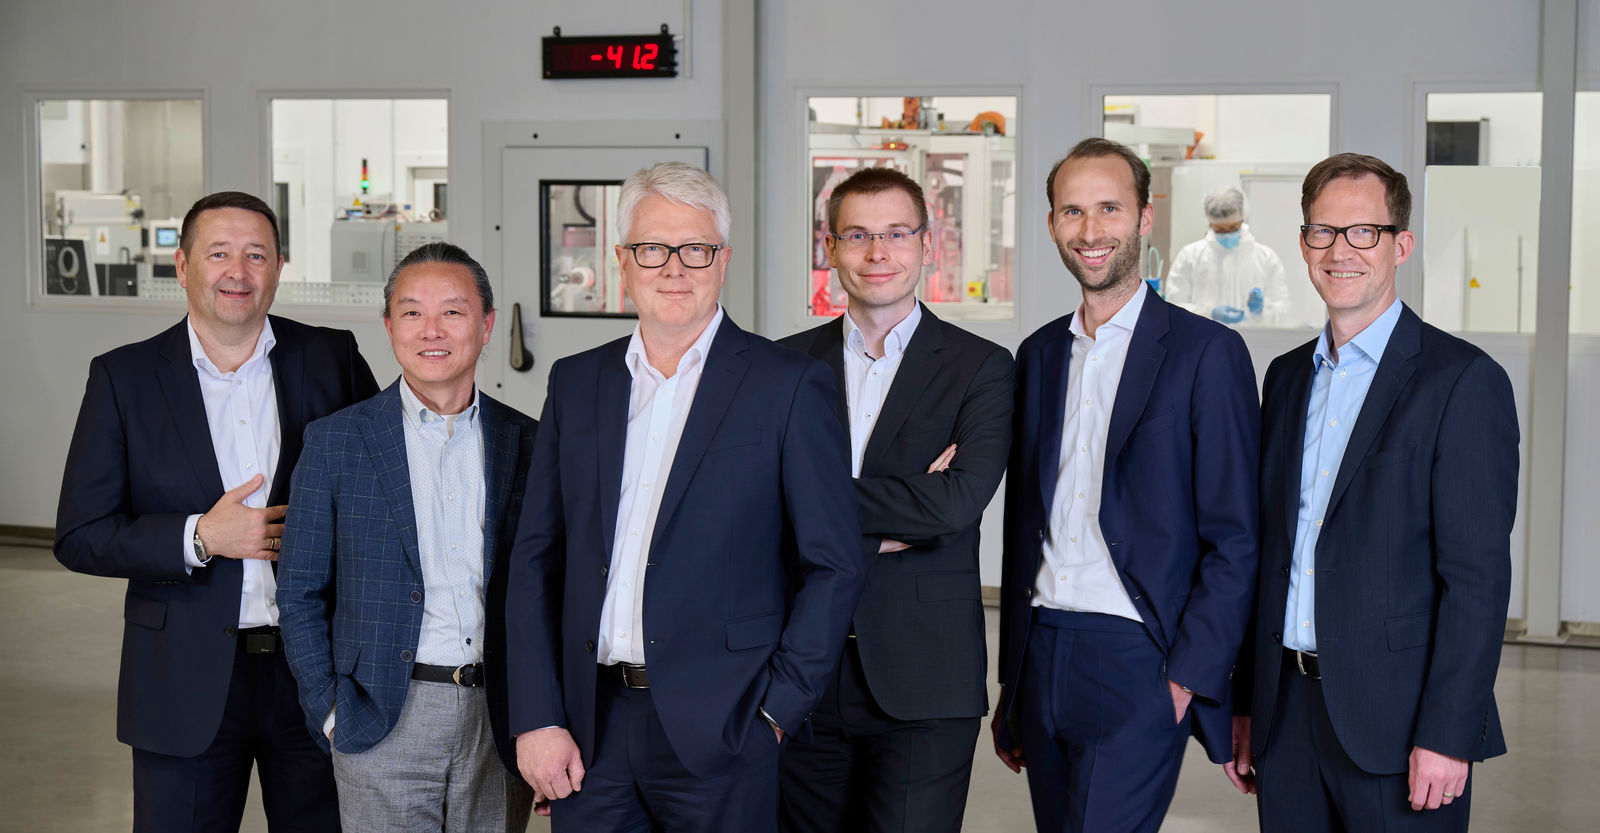 The Executive Board of the new European company for the battery business of Volkswagen AG